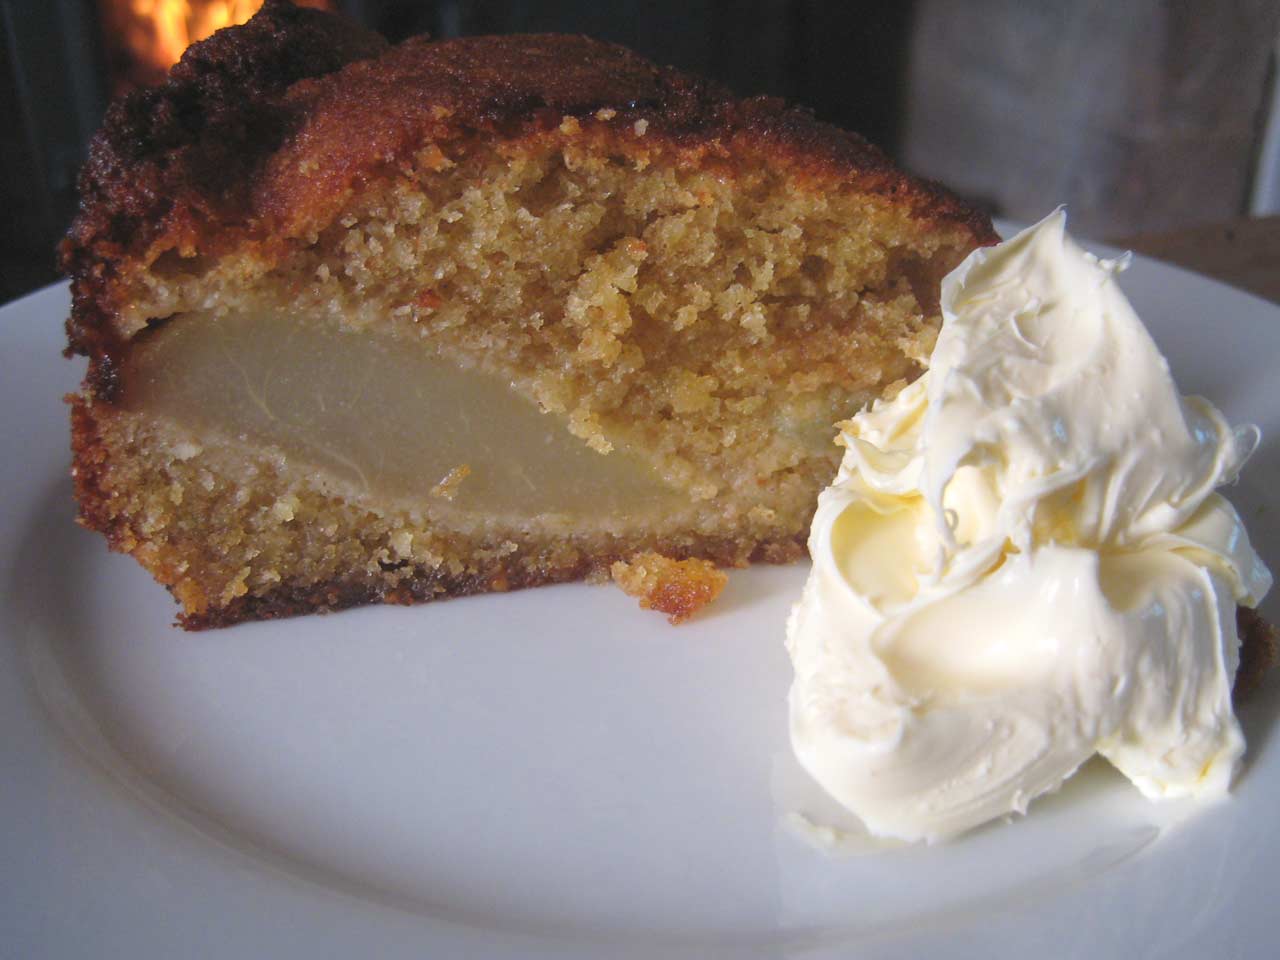 Hugh Fearnley-Whittingstall's pear and almond pudding cake